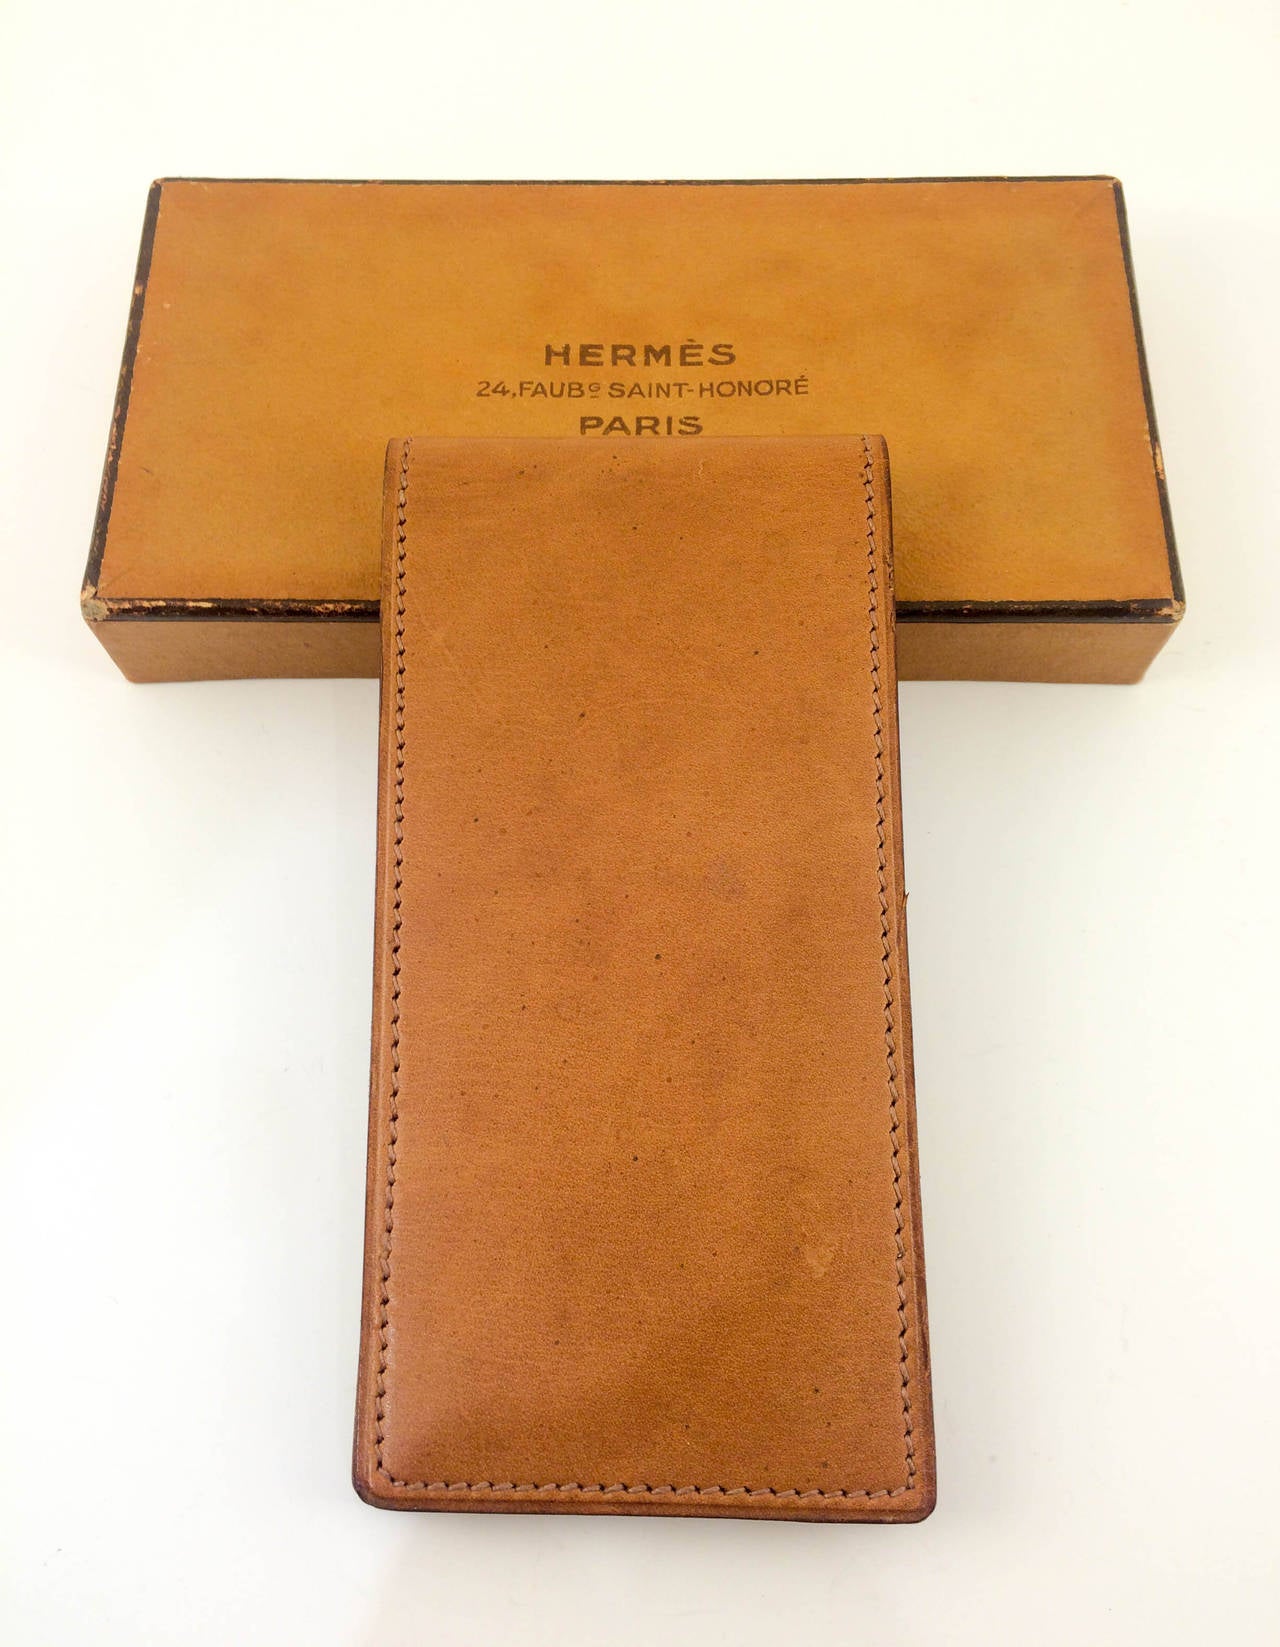 Fabulous Vintage Hermes Notepad. This amazing piece from the 1950s comprises of a leather case and 6 notepads in its original box. It seems to have never been used, with the only signs showing being due to age. The box has a bit of wear and tear on